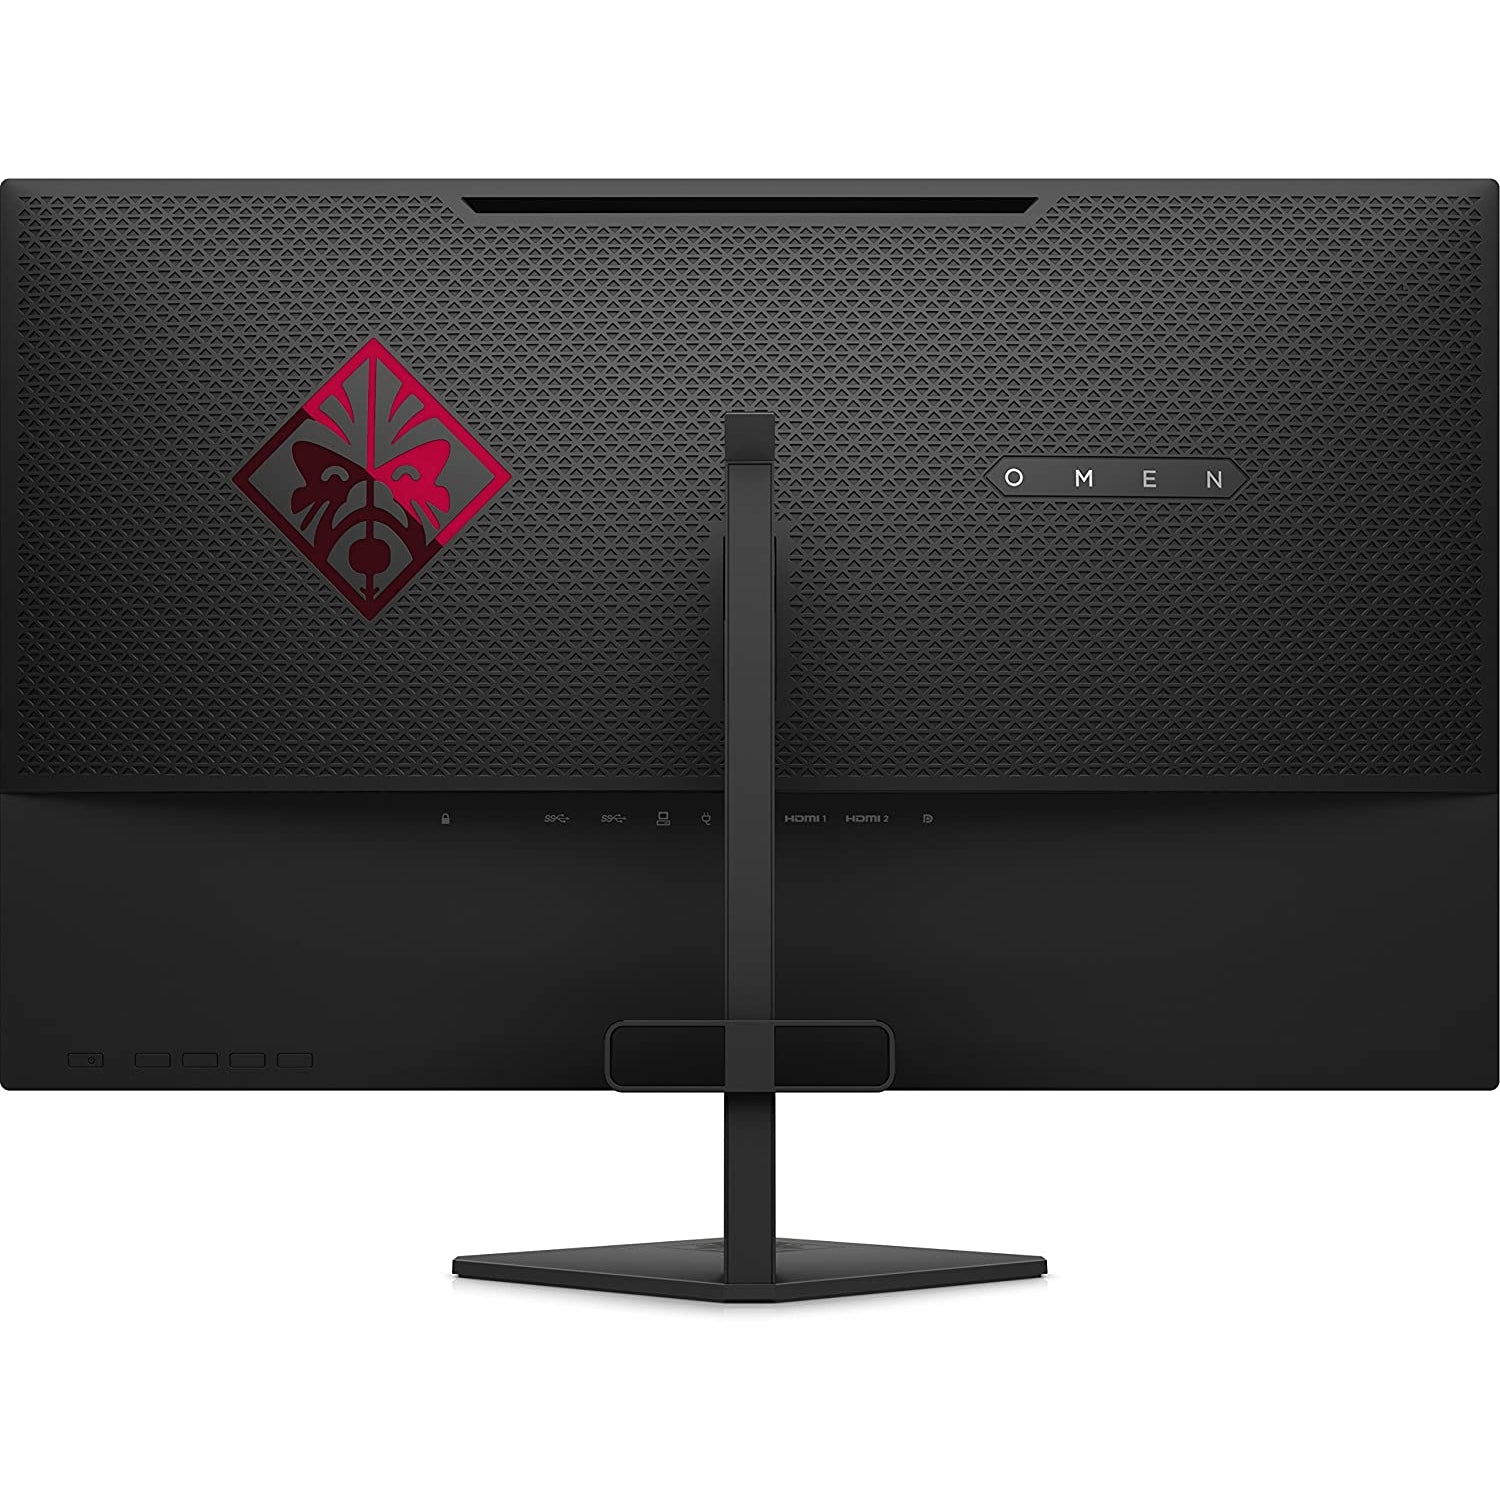 HP Omen LED Monitor 25 inches FHD 1080p HDMI